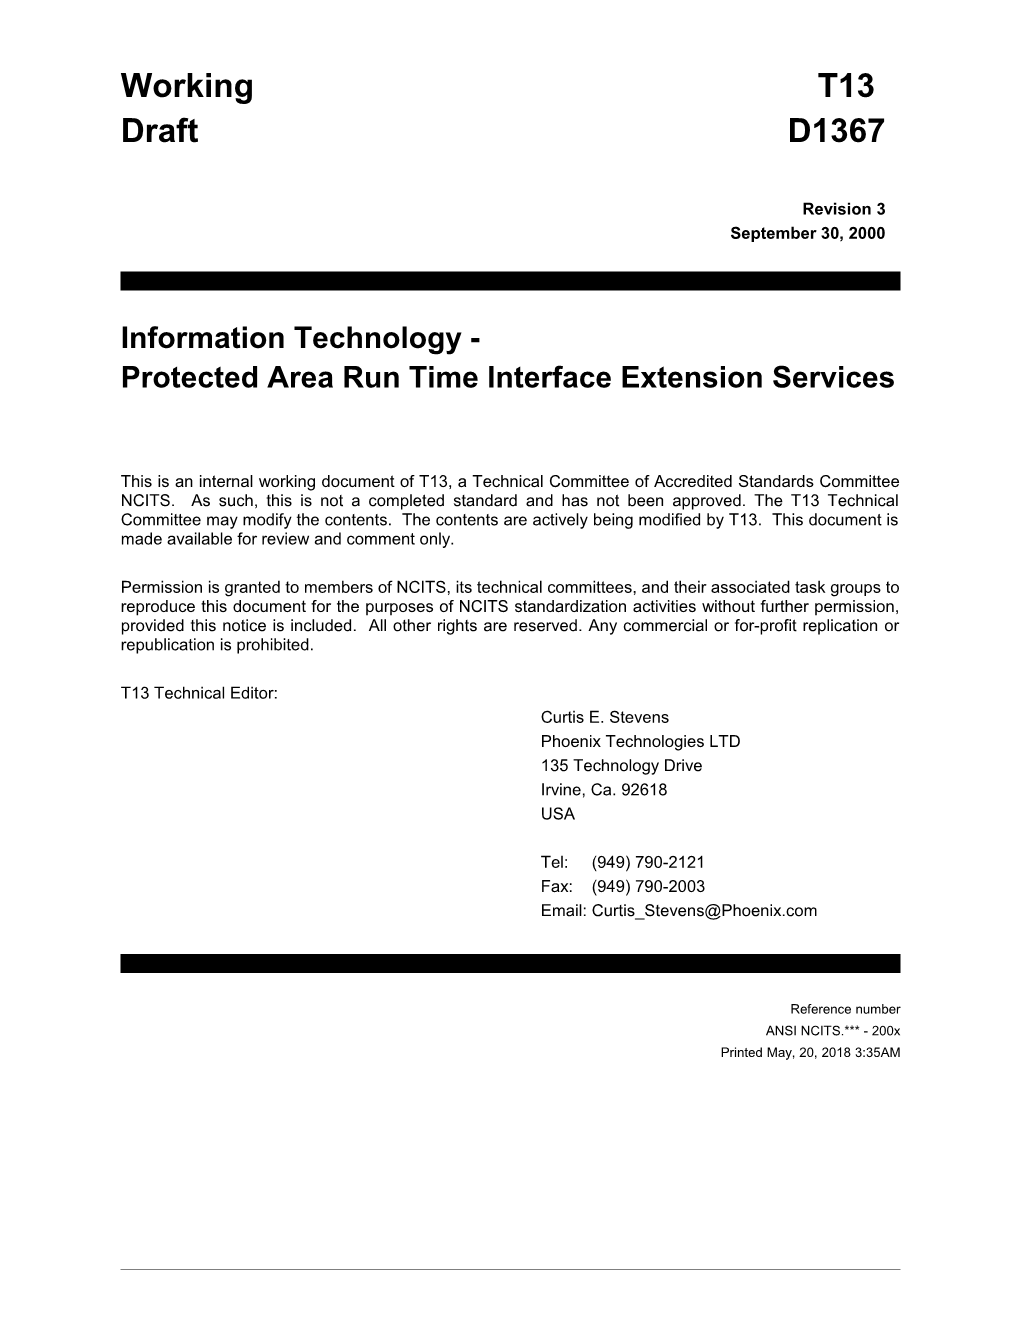 Protected Area Run Time Interface Extension Services